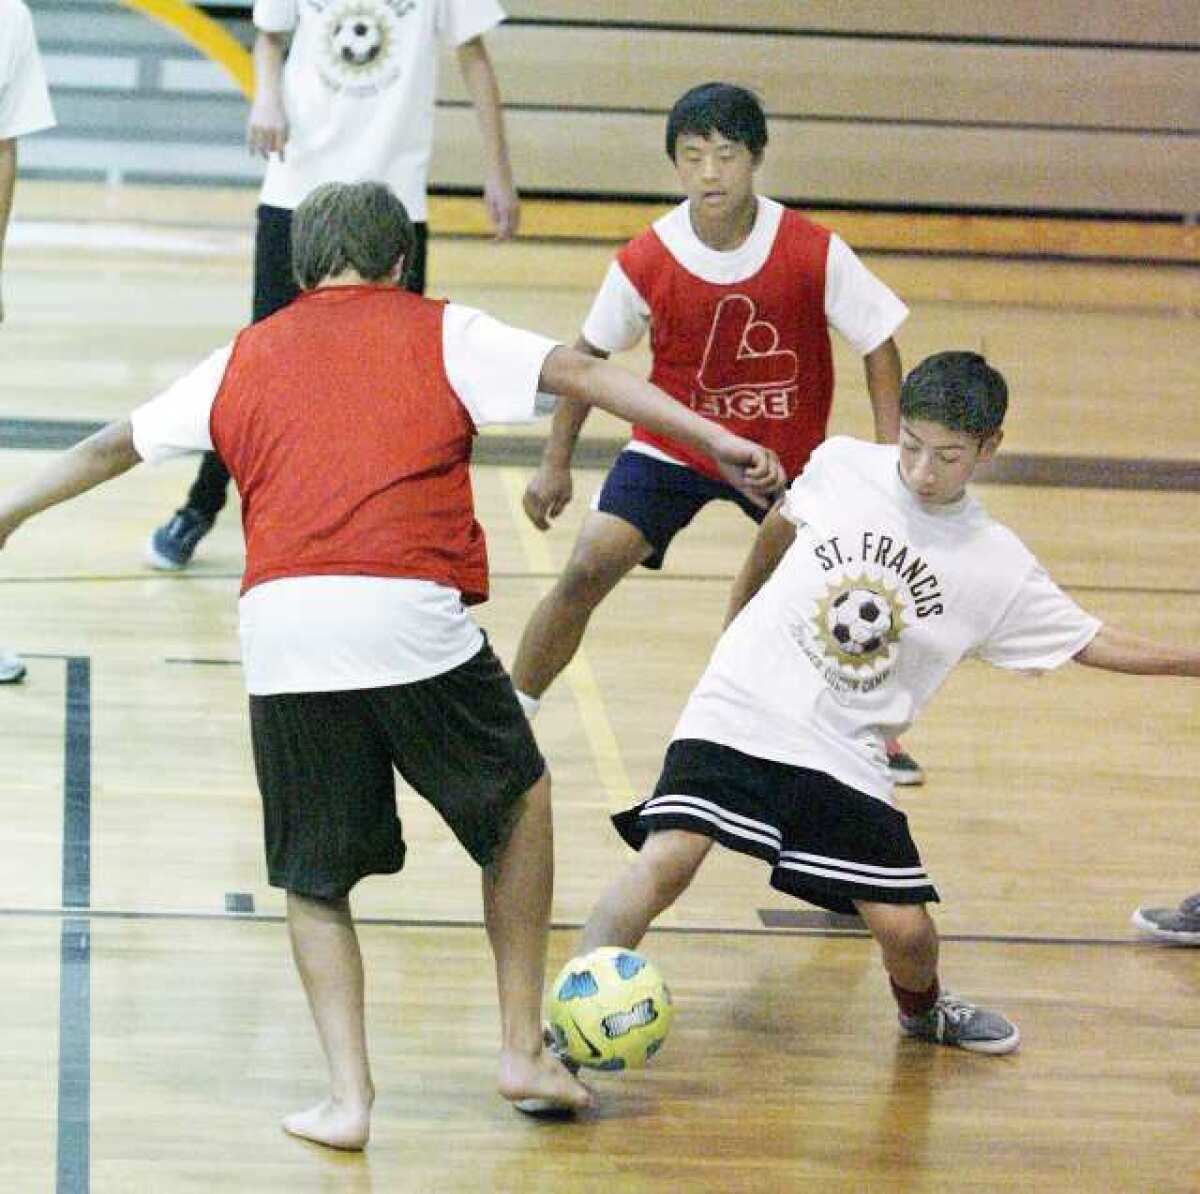 Players were divided baed on age and skill into different groups with groups competing in the gym at St. Francis High after the morning temperatures got too hot and humid at the St. Francis Soccer Camp.